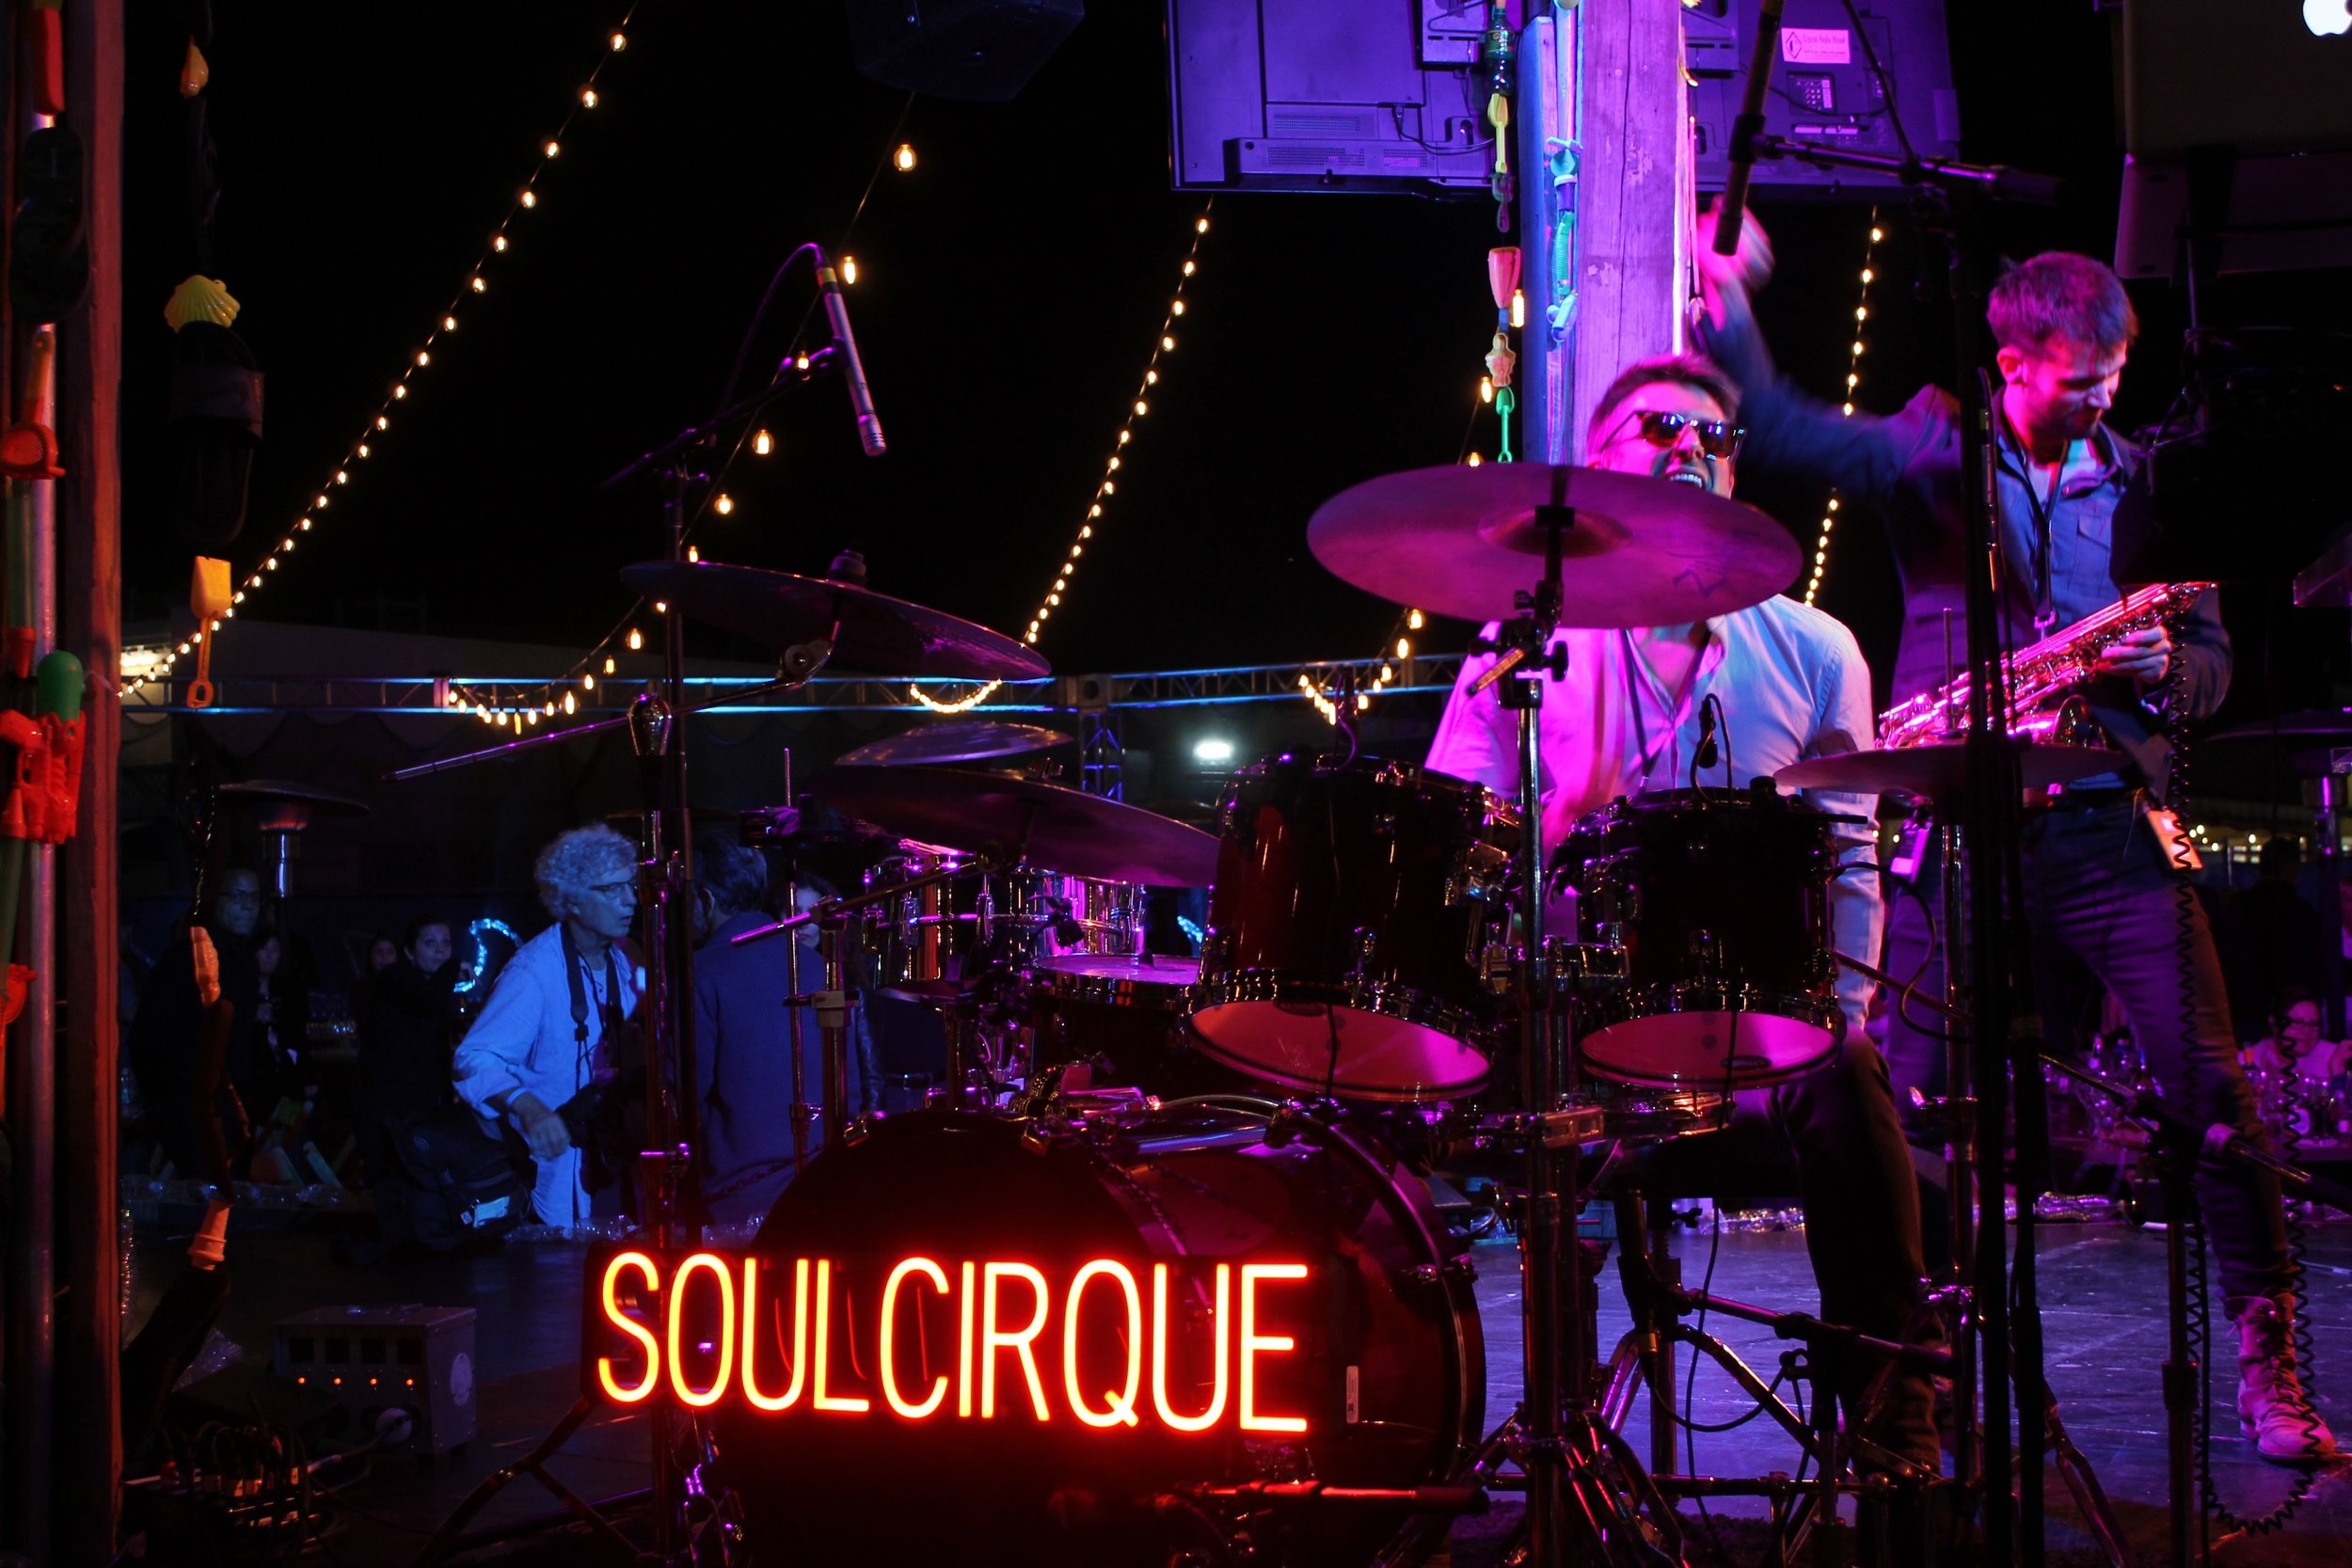 Jason Gates on Drums - Soulcirque is a DJ Hybrid Band that blends DJ'ing with live instruments. Great for dance parties, corporate events, and weddings.